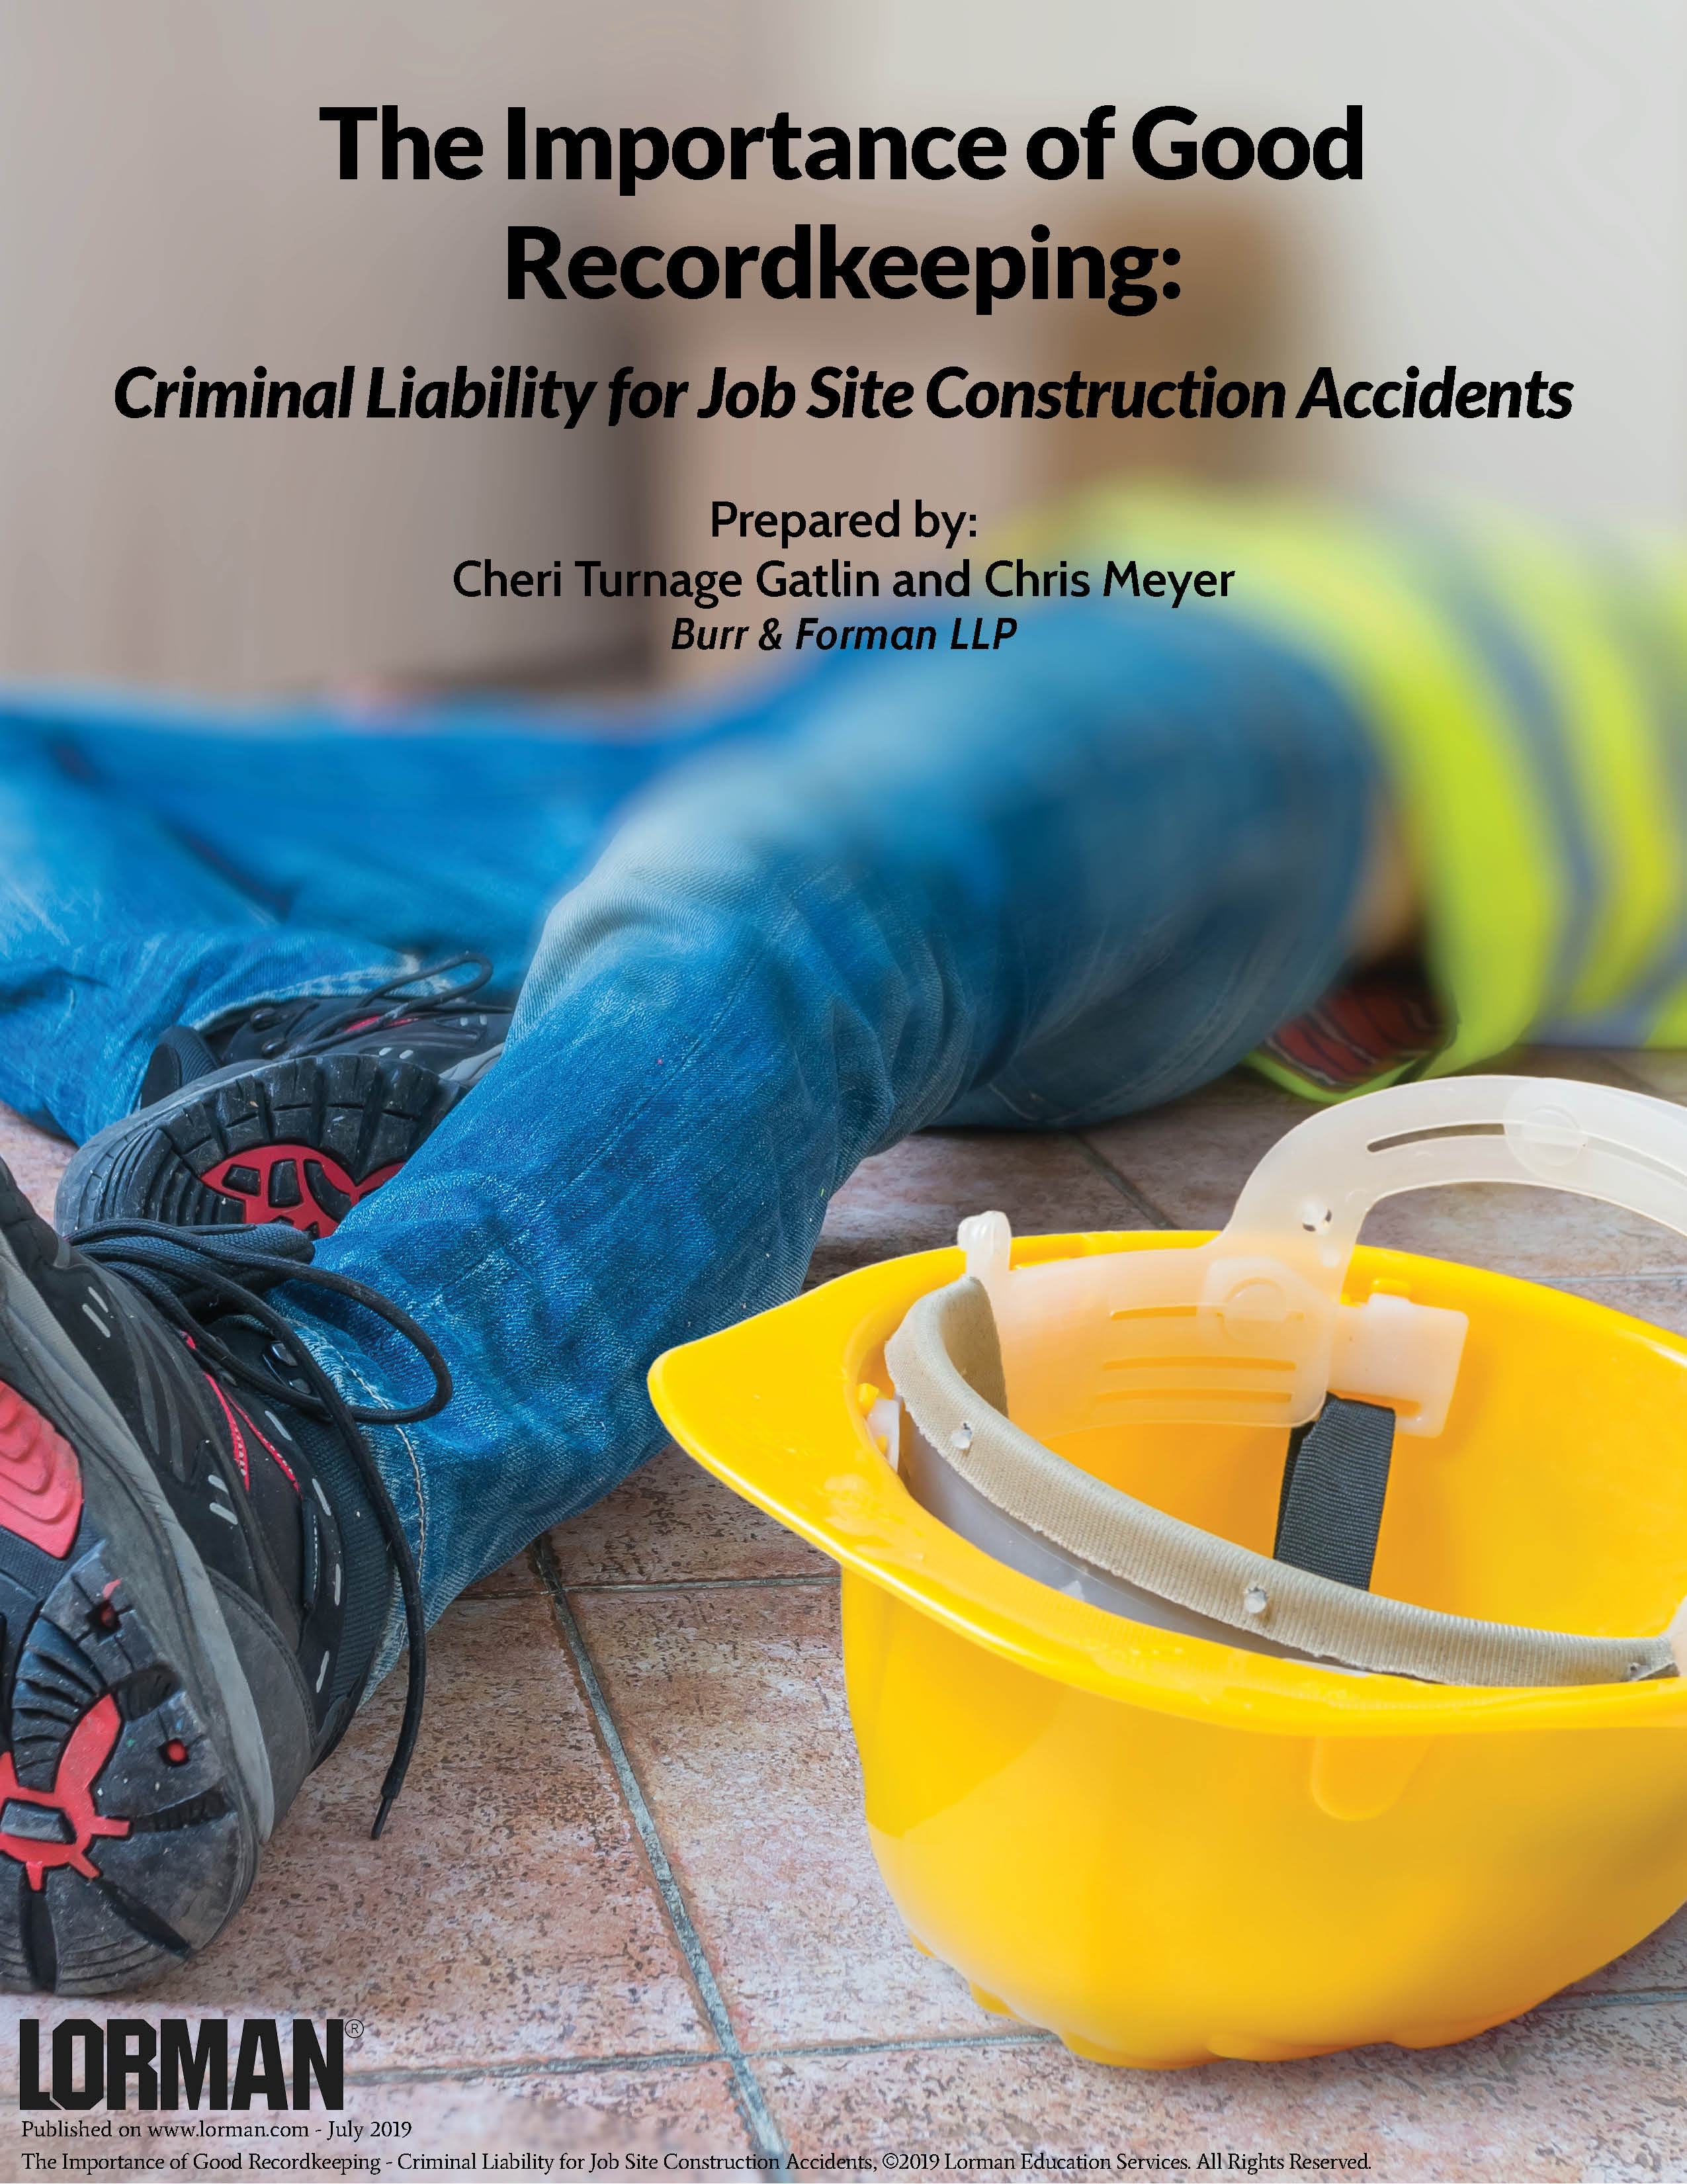 The Importance of Good Recordkeeping - Criminal Liability for Job Site Construction Accidents